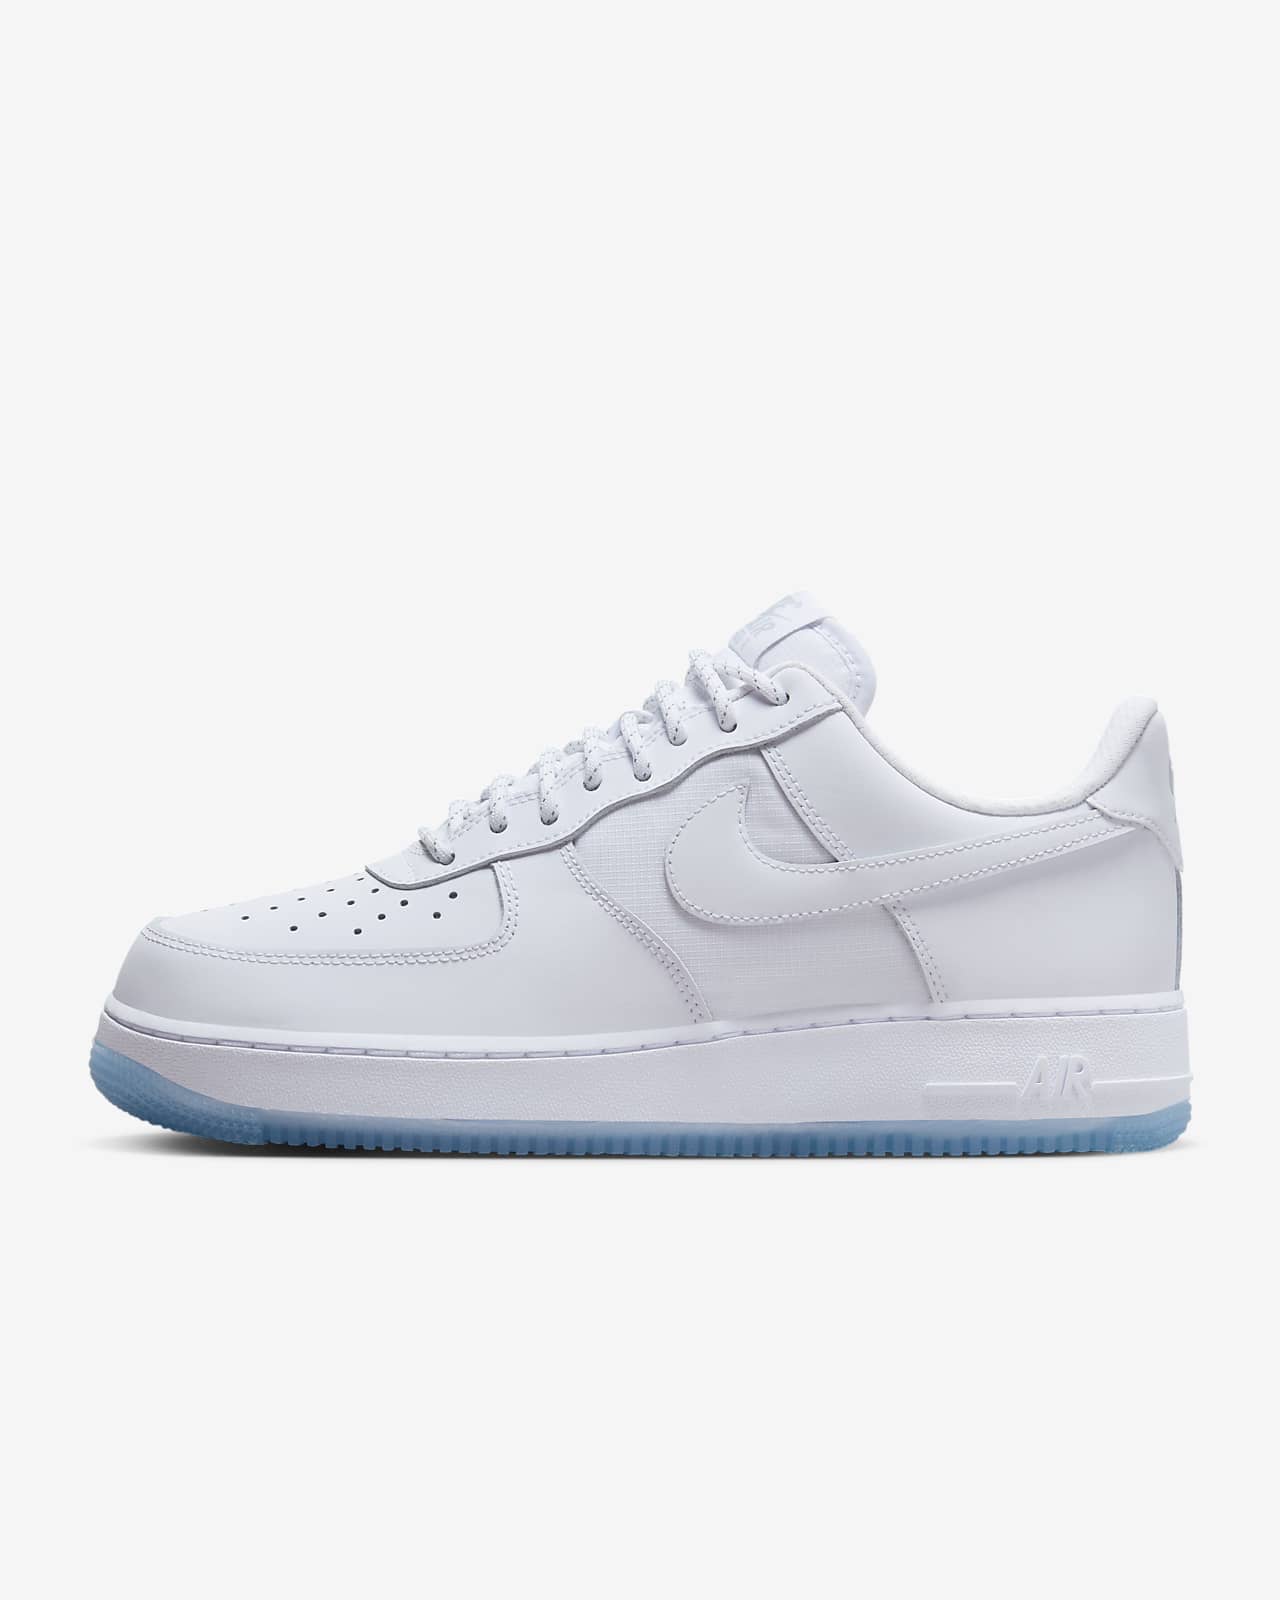 Chaussure Nike Air Force 1 '07 pour homme. Nike CA